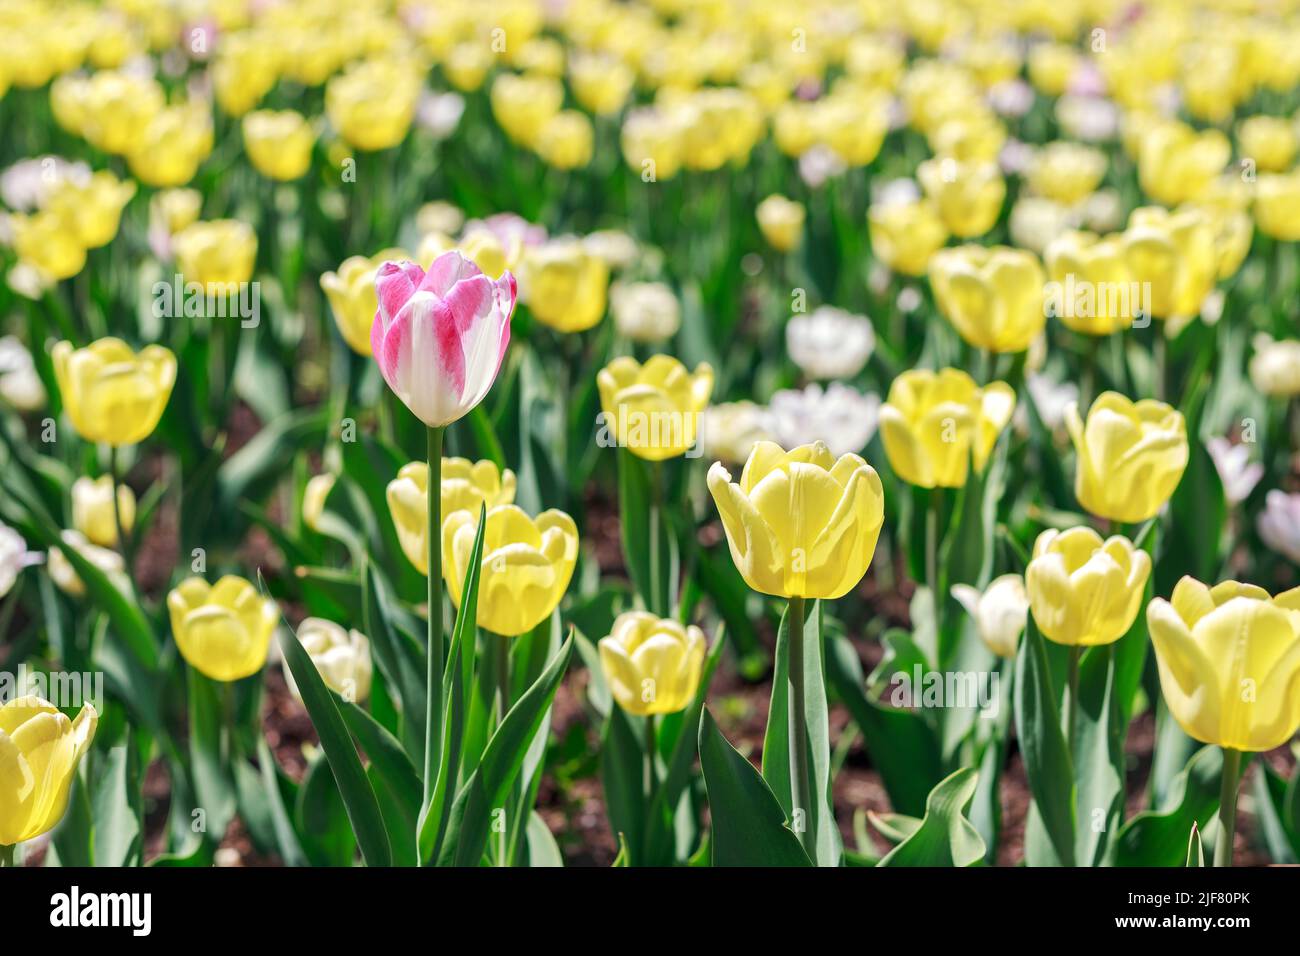 Flowers in the park on a sunny day. Garden with beautiful yellow tulips. Natural spring full frame background. Stock Photo